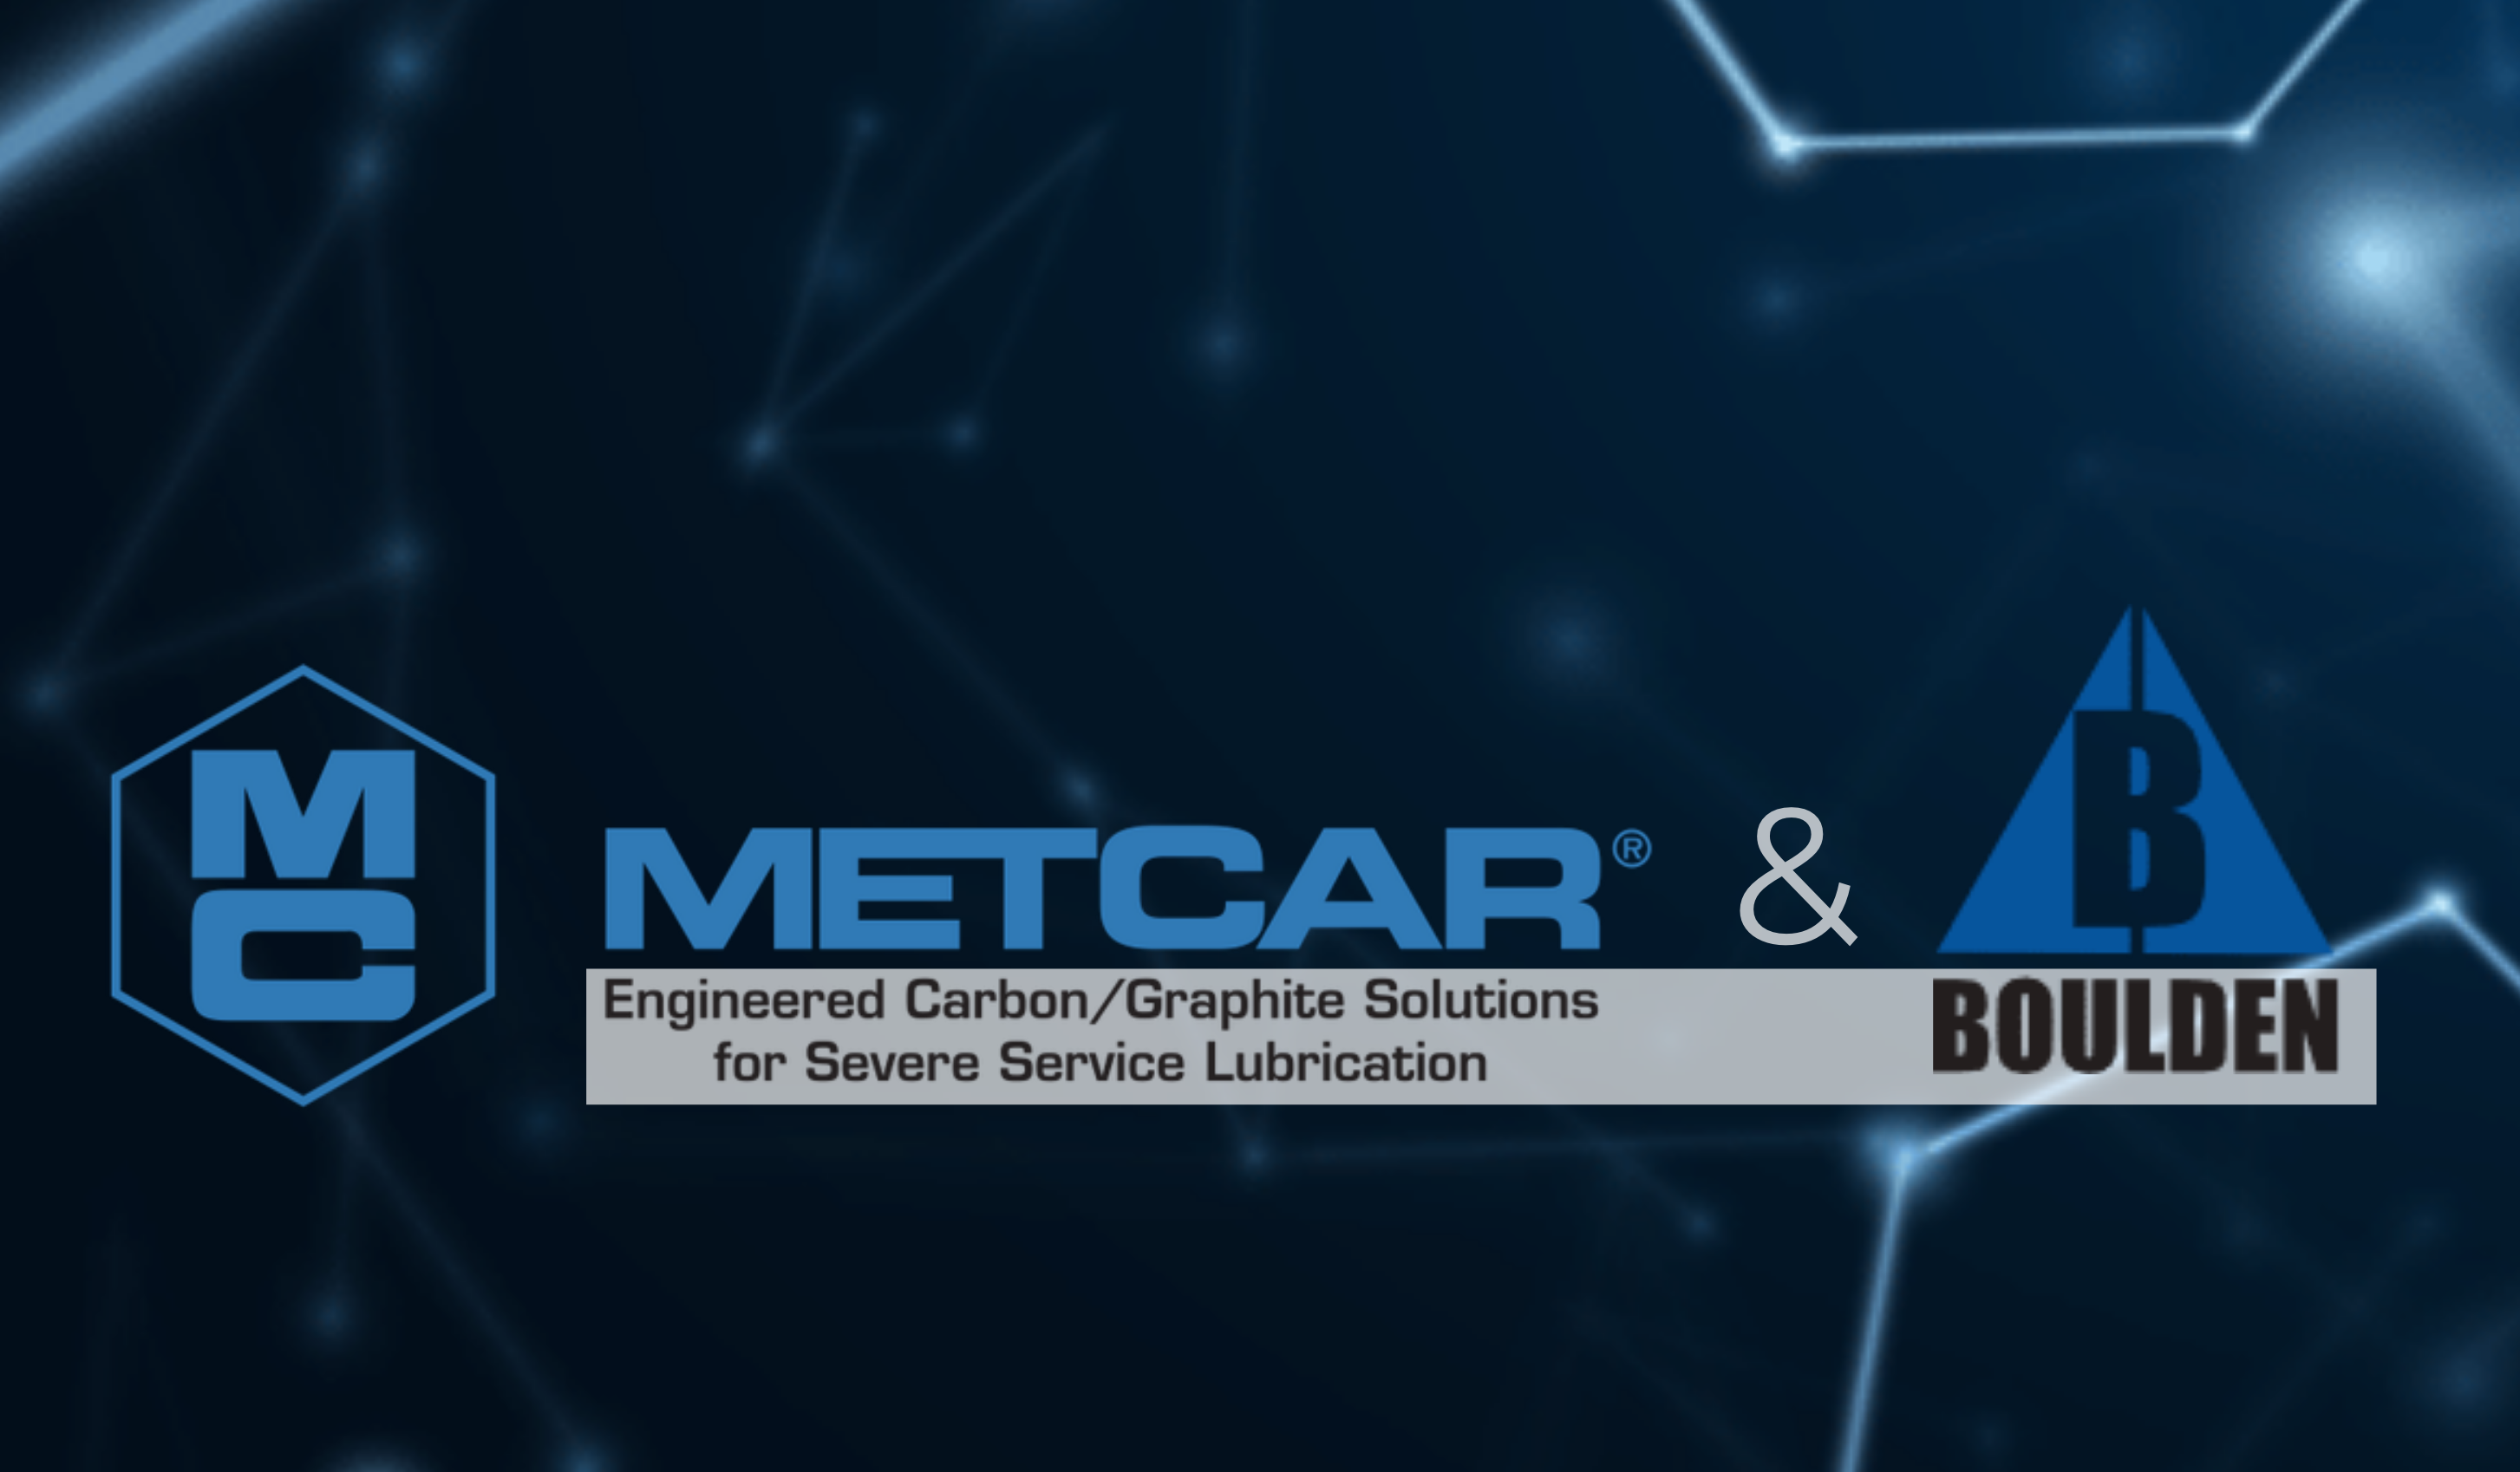 New in Pump Repair: Metcar Partners with Boulden Company to Distribute Carbon Graphite Parts